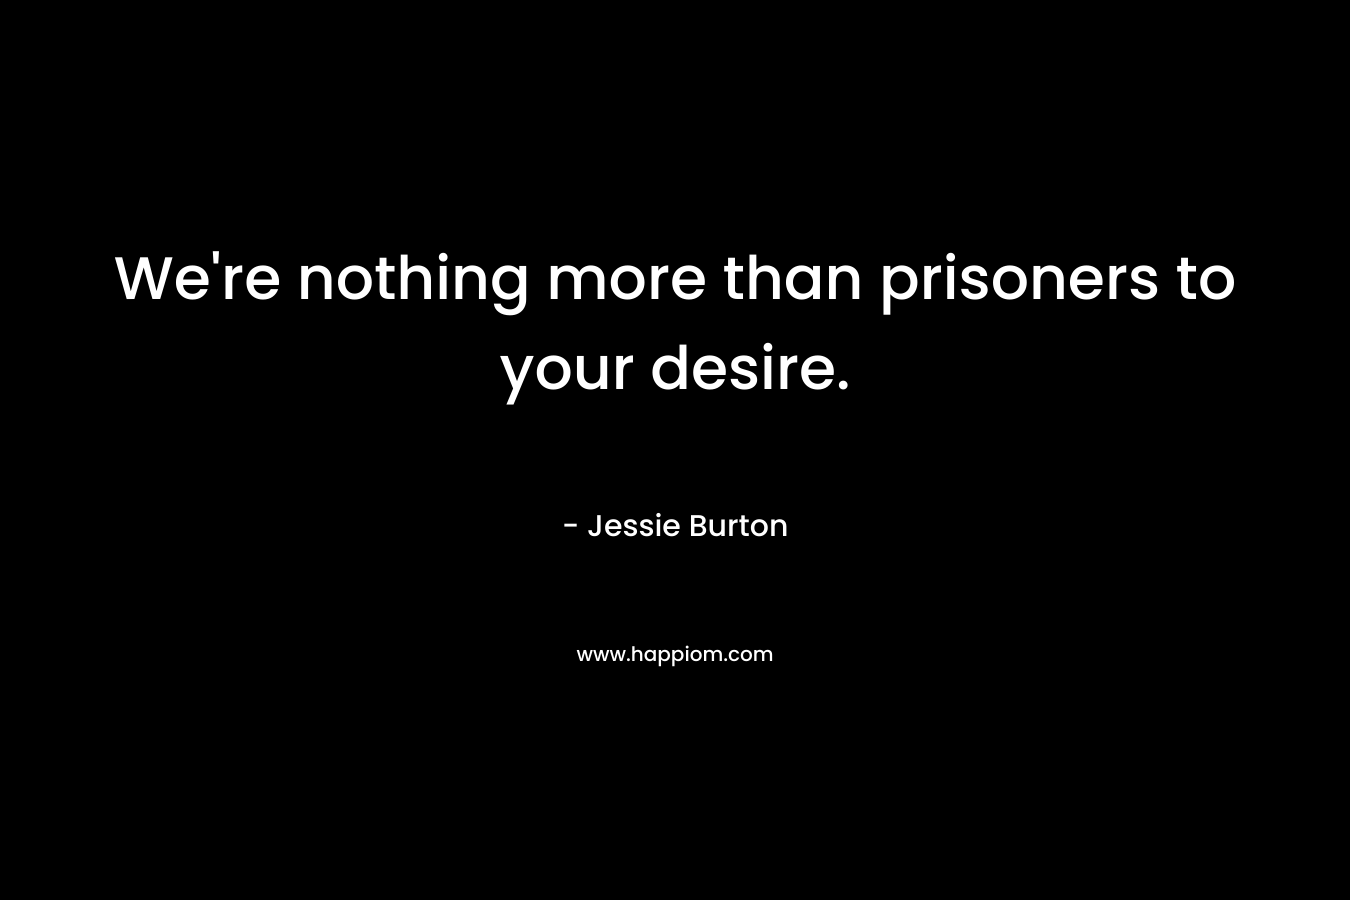 We’re nothing more than prisoners to your desire. – Jessie Burton